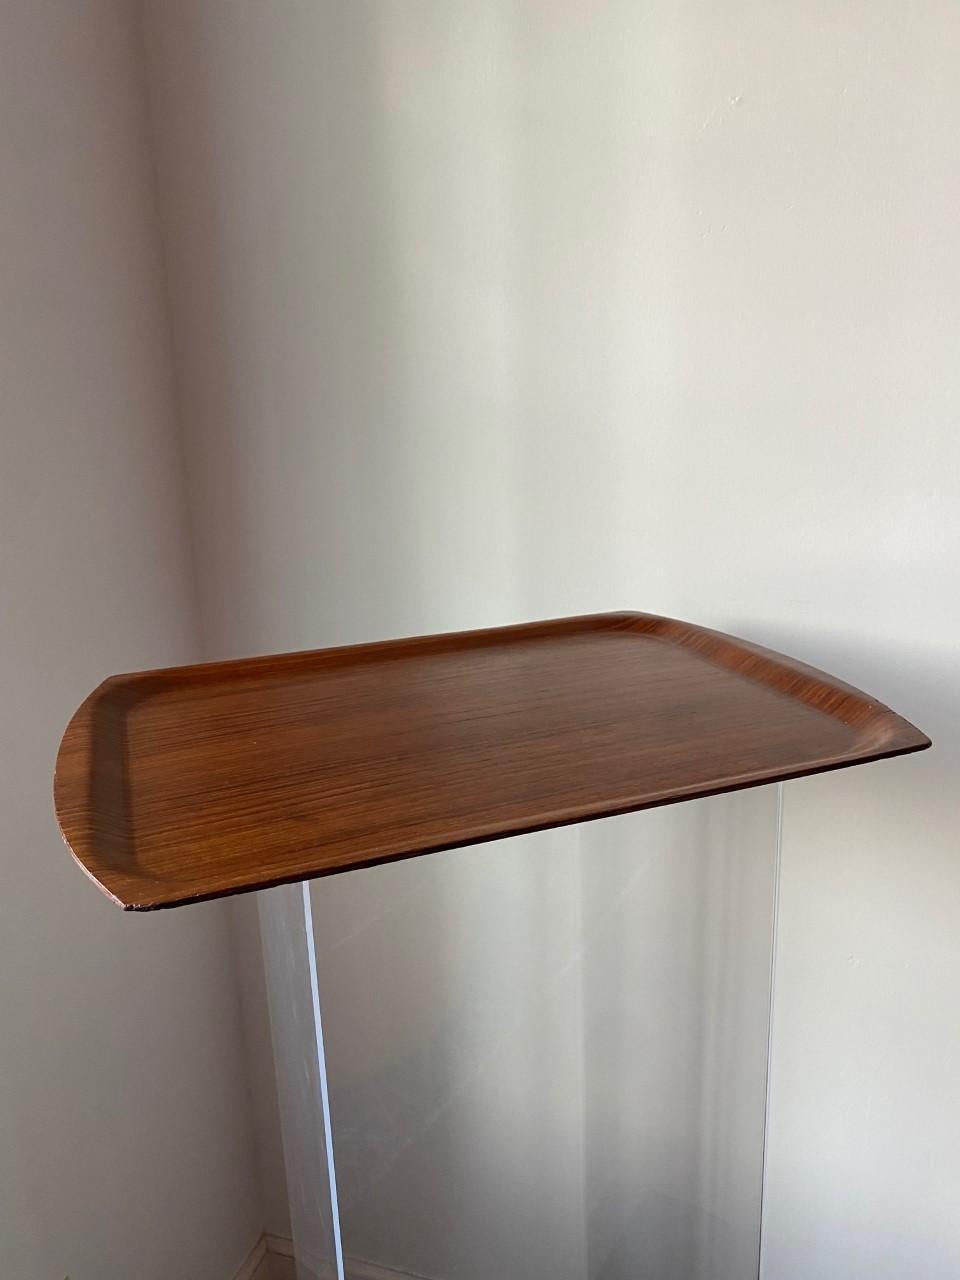 Danish Dansk teak tray which teak with stunning wood grain. Tray doesn't have Dansk marking on the underside but came in its original box at one point. Made in Denmark signature engraved. Piece obtain in Denmark.


Excellent design that would